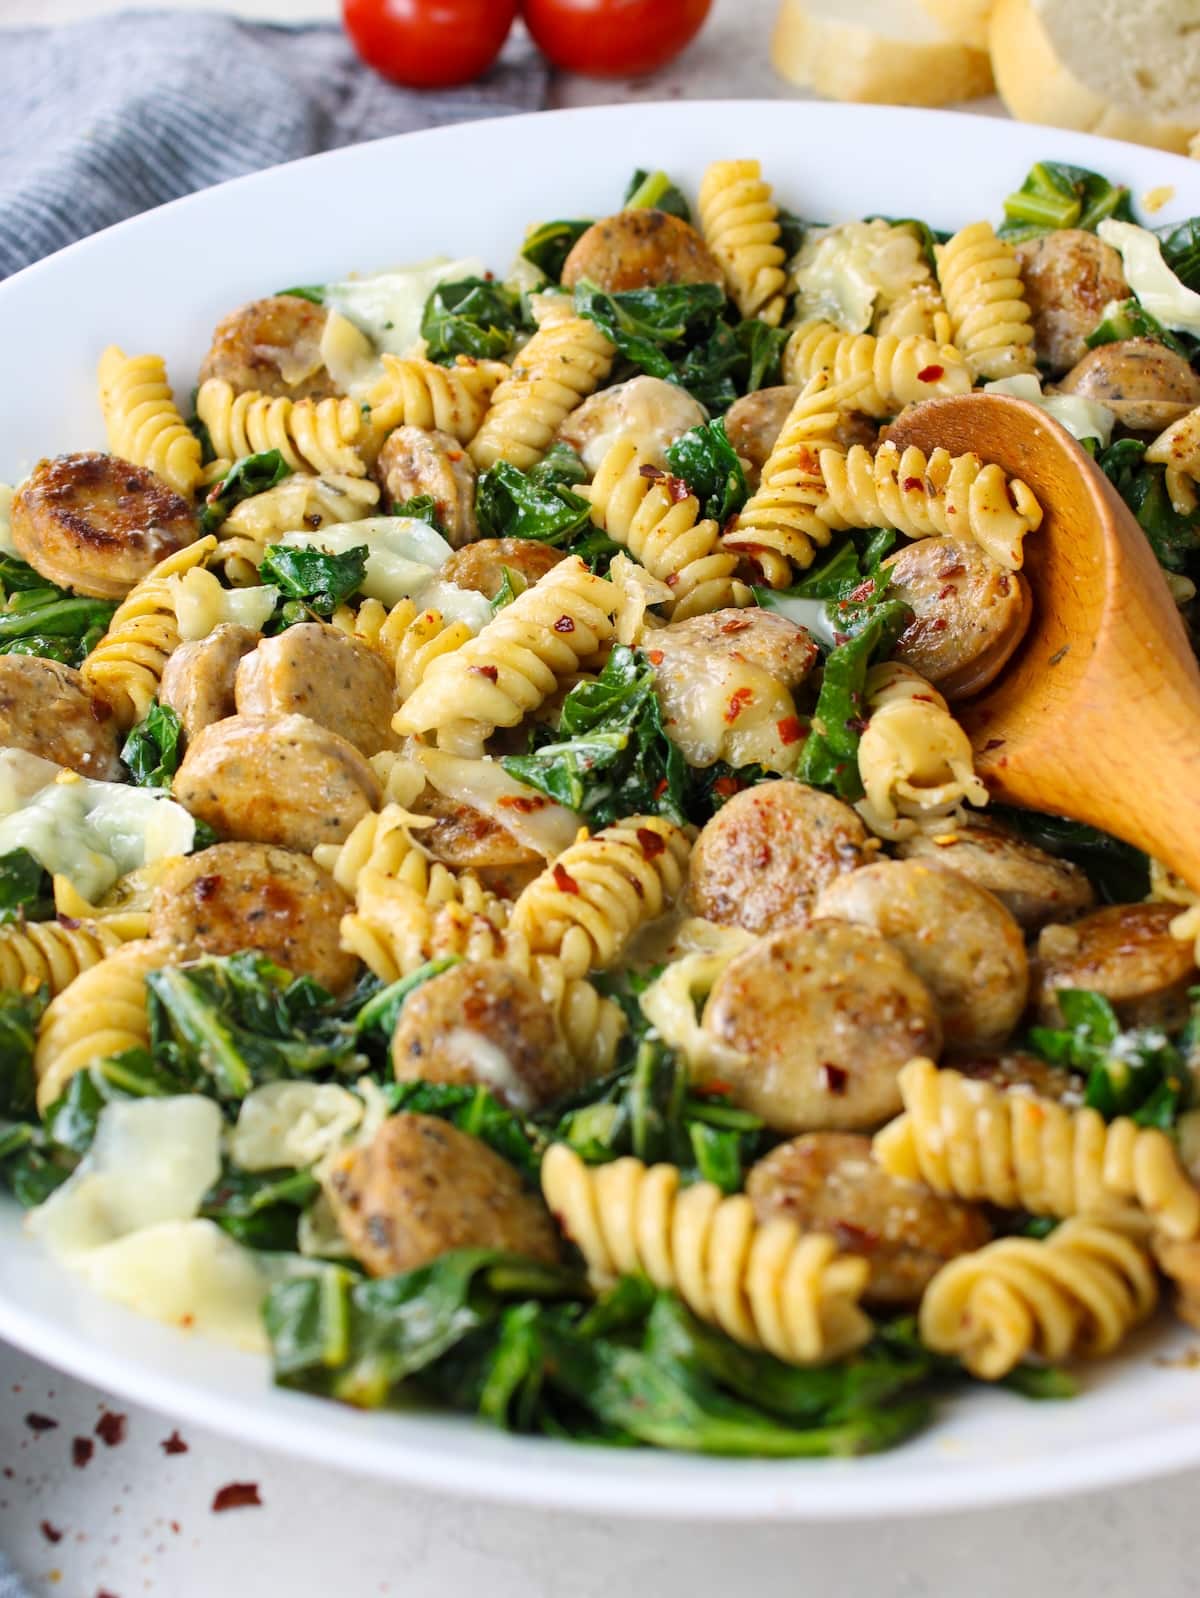 A plate of Italian Herb & Rotini Collard Greens with Chicken Sausage.